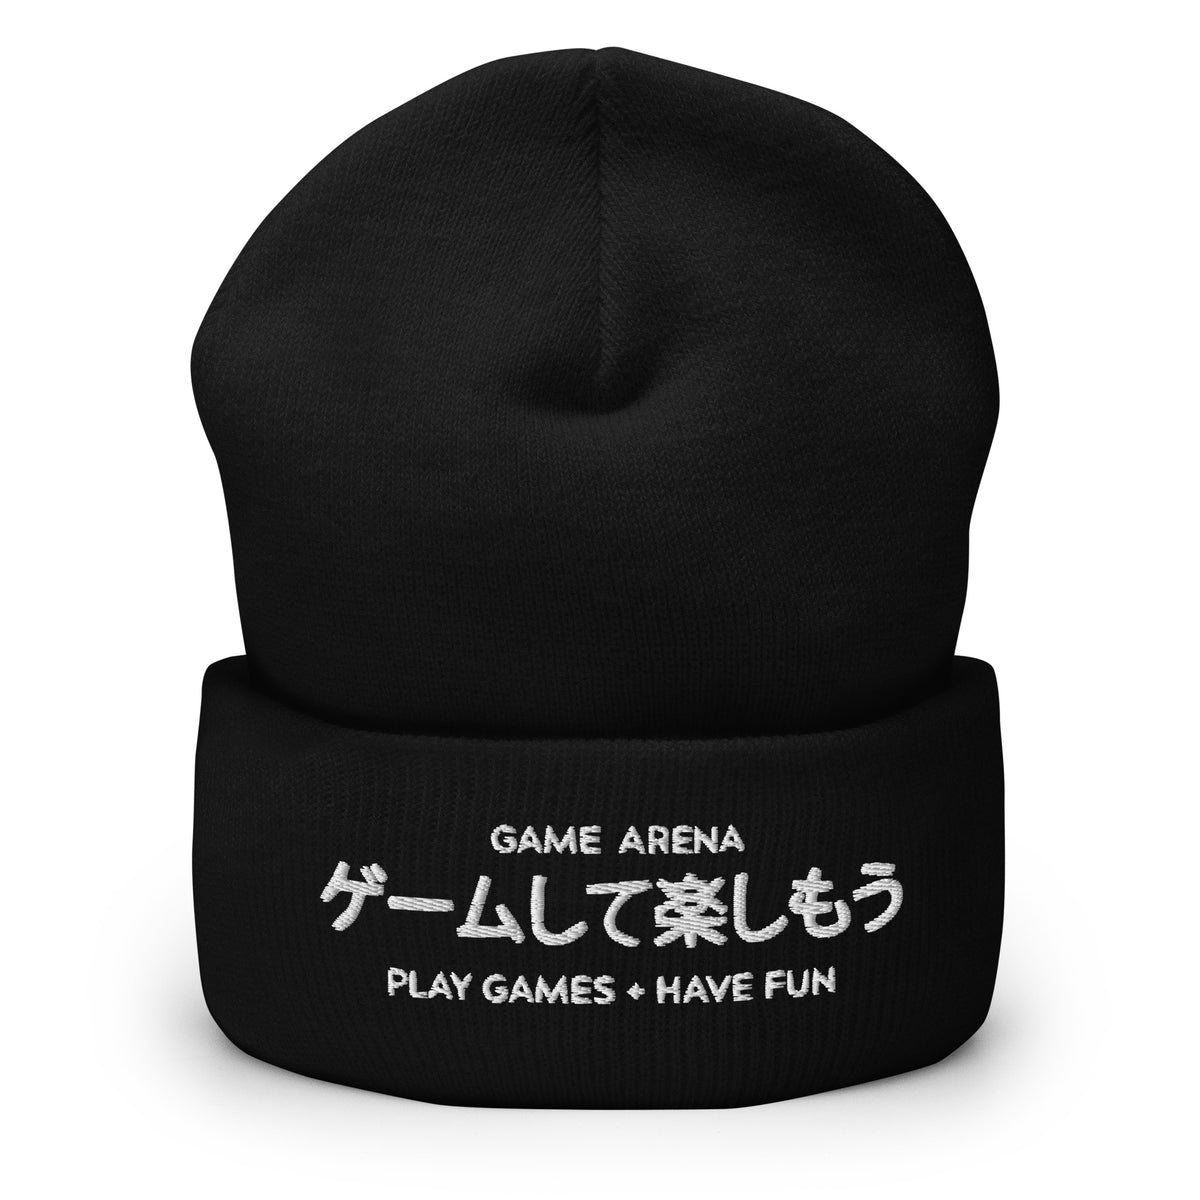 Game Arena Season 1 | On Demand | Embroidered Game & Have Fun! Cuffed Beanie - Black